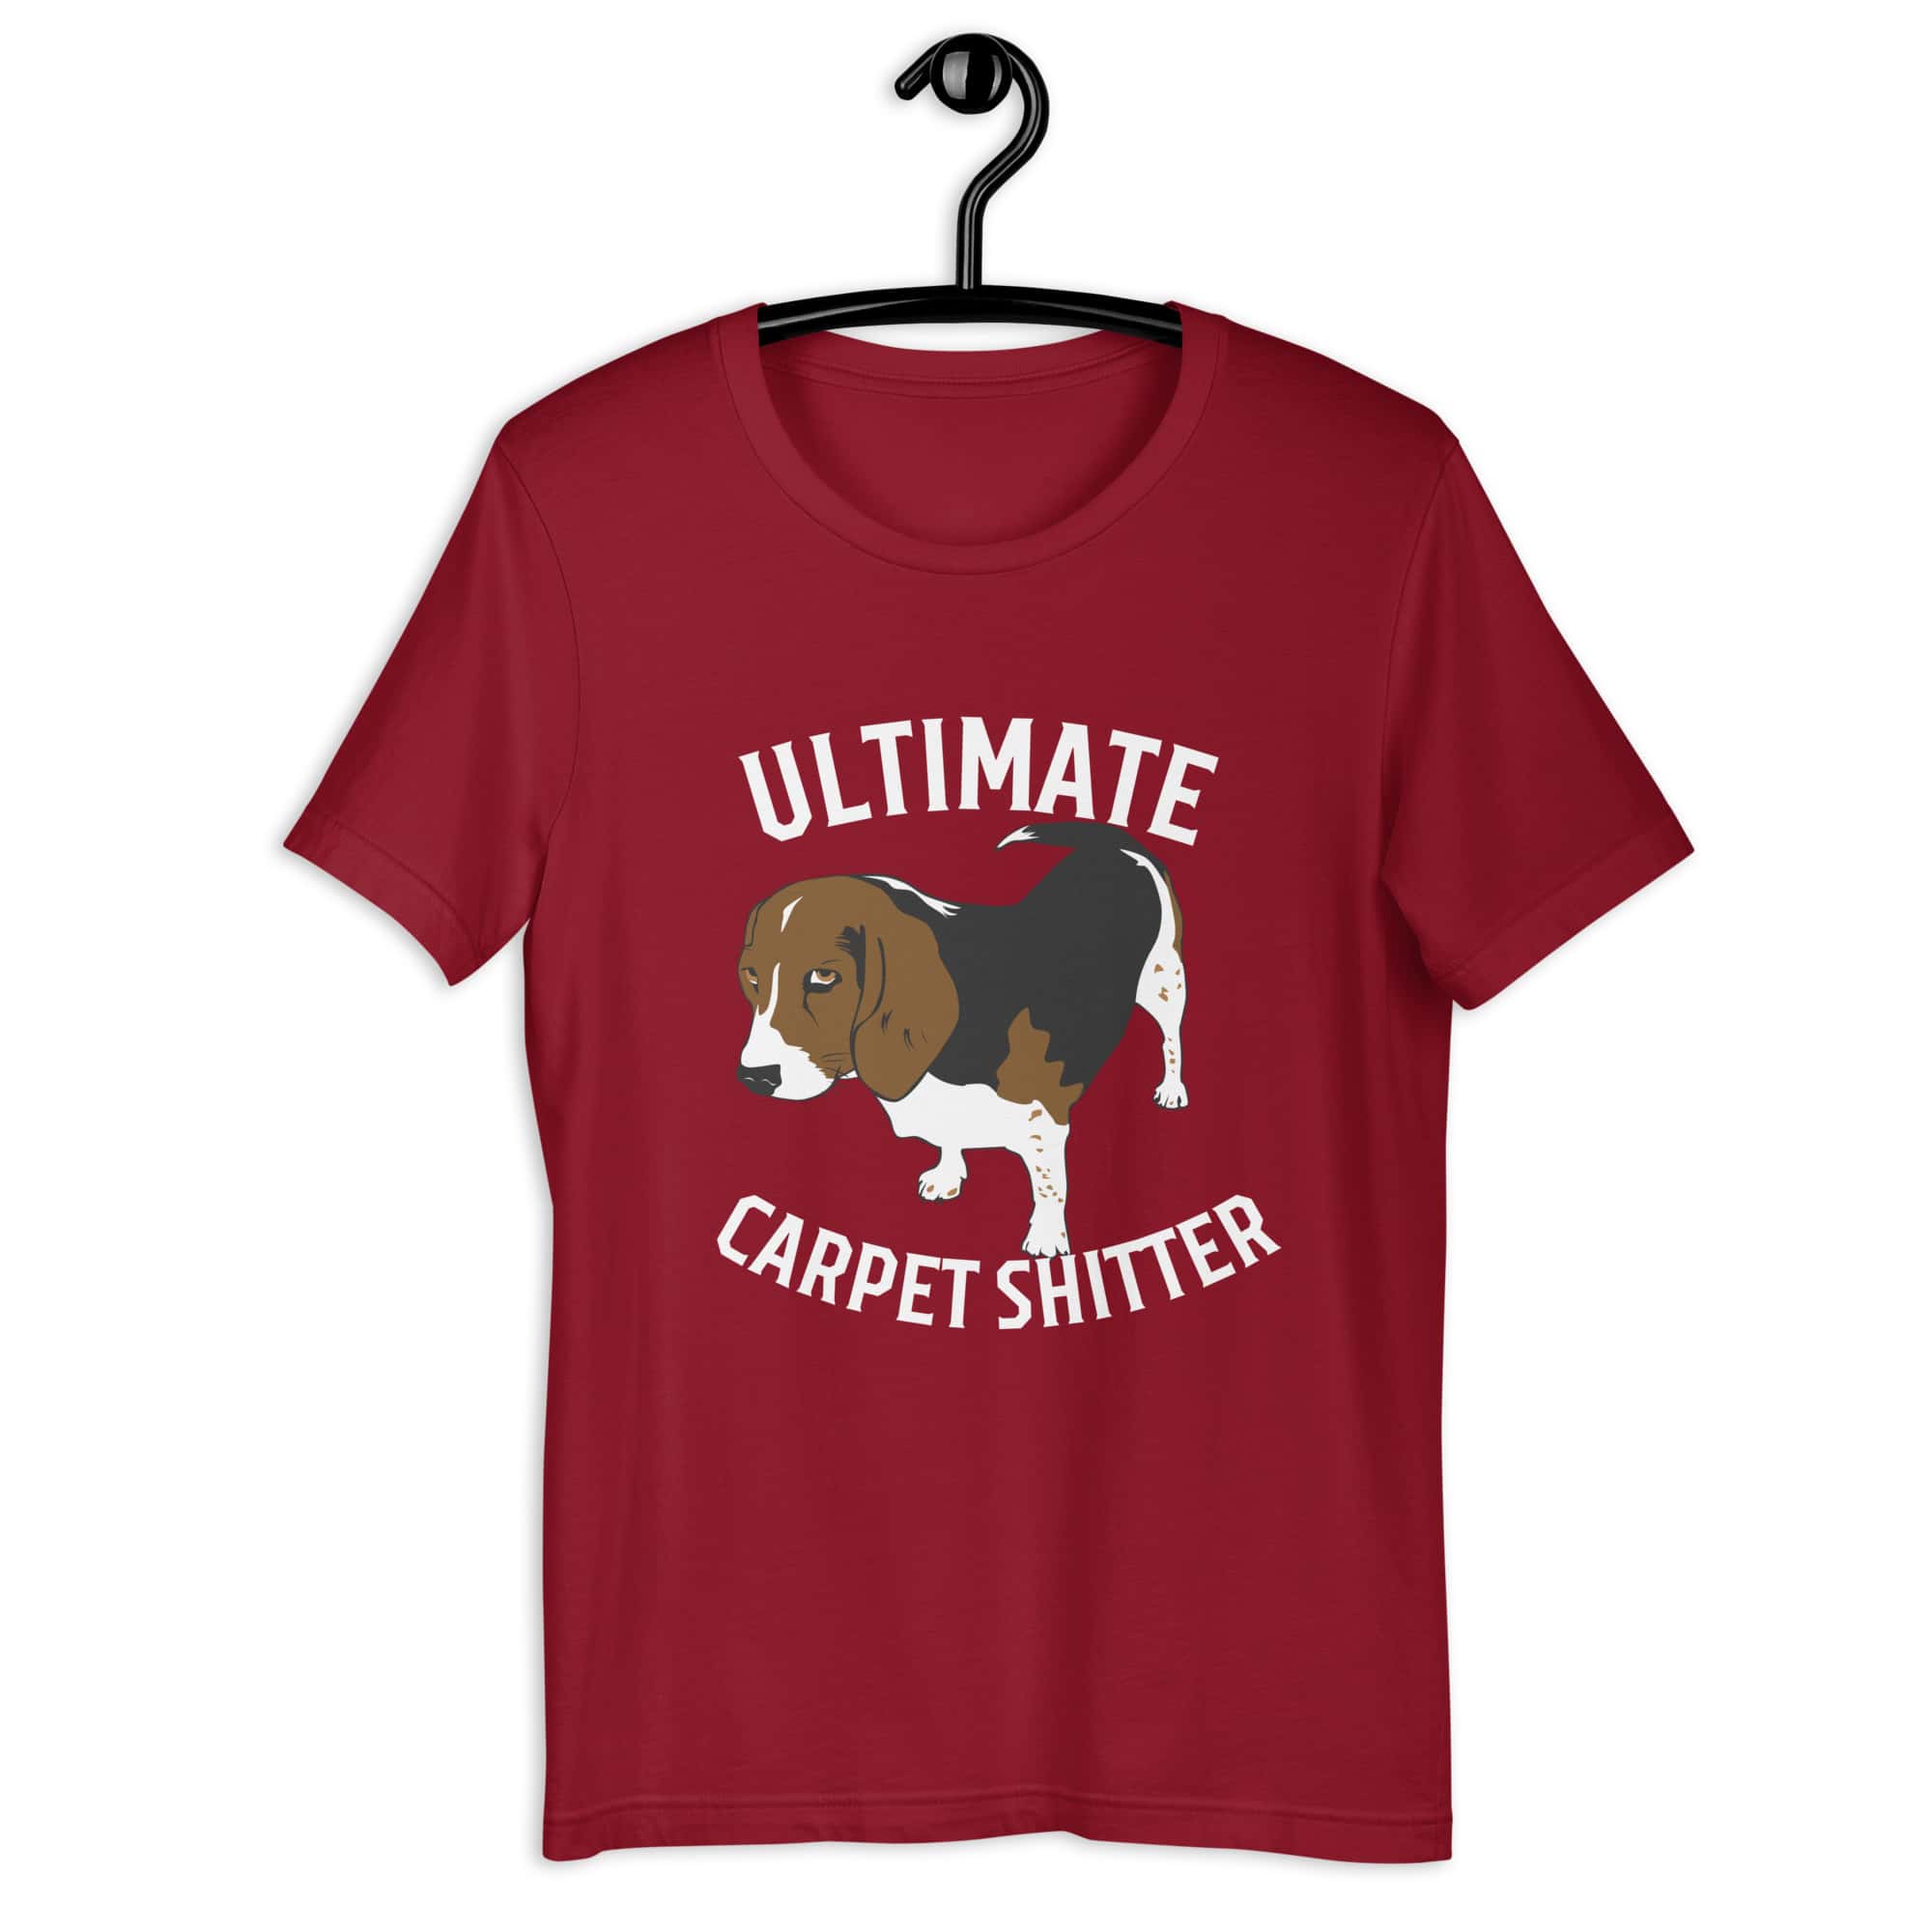 The Ultimate Carpet Shitter Funny Hound Unisex T-Shirt maroon